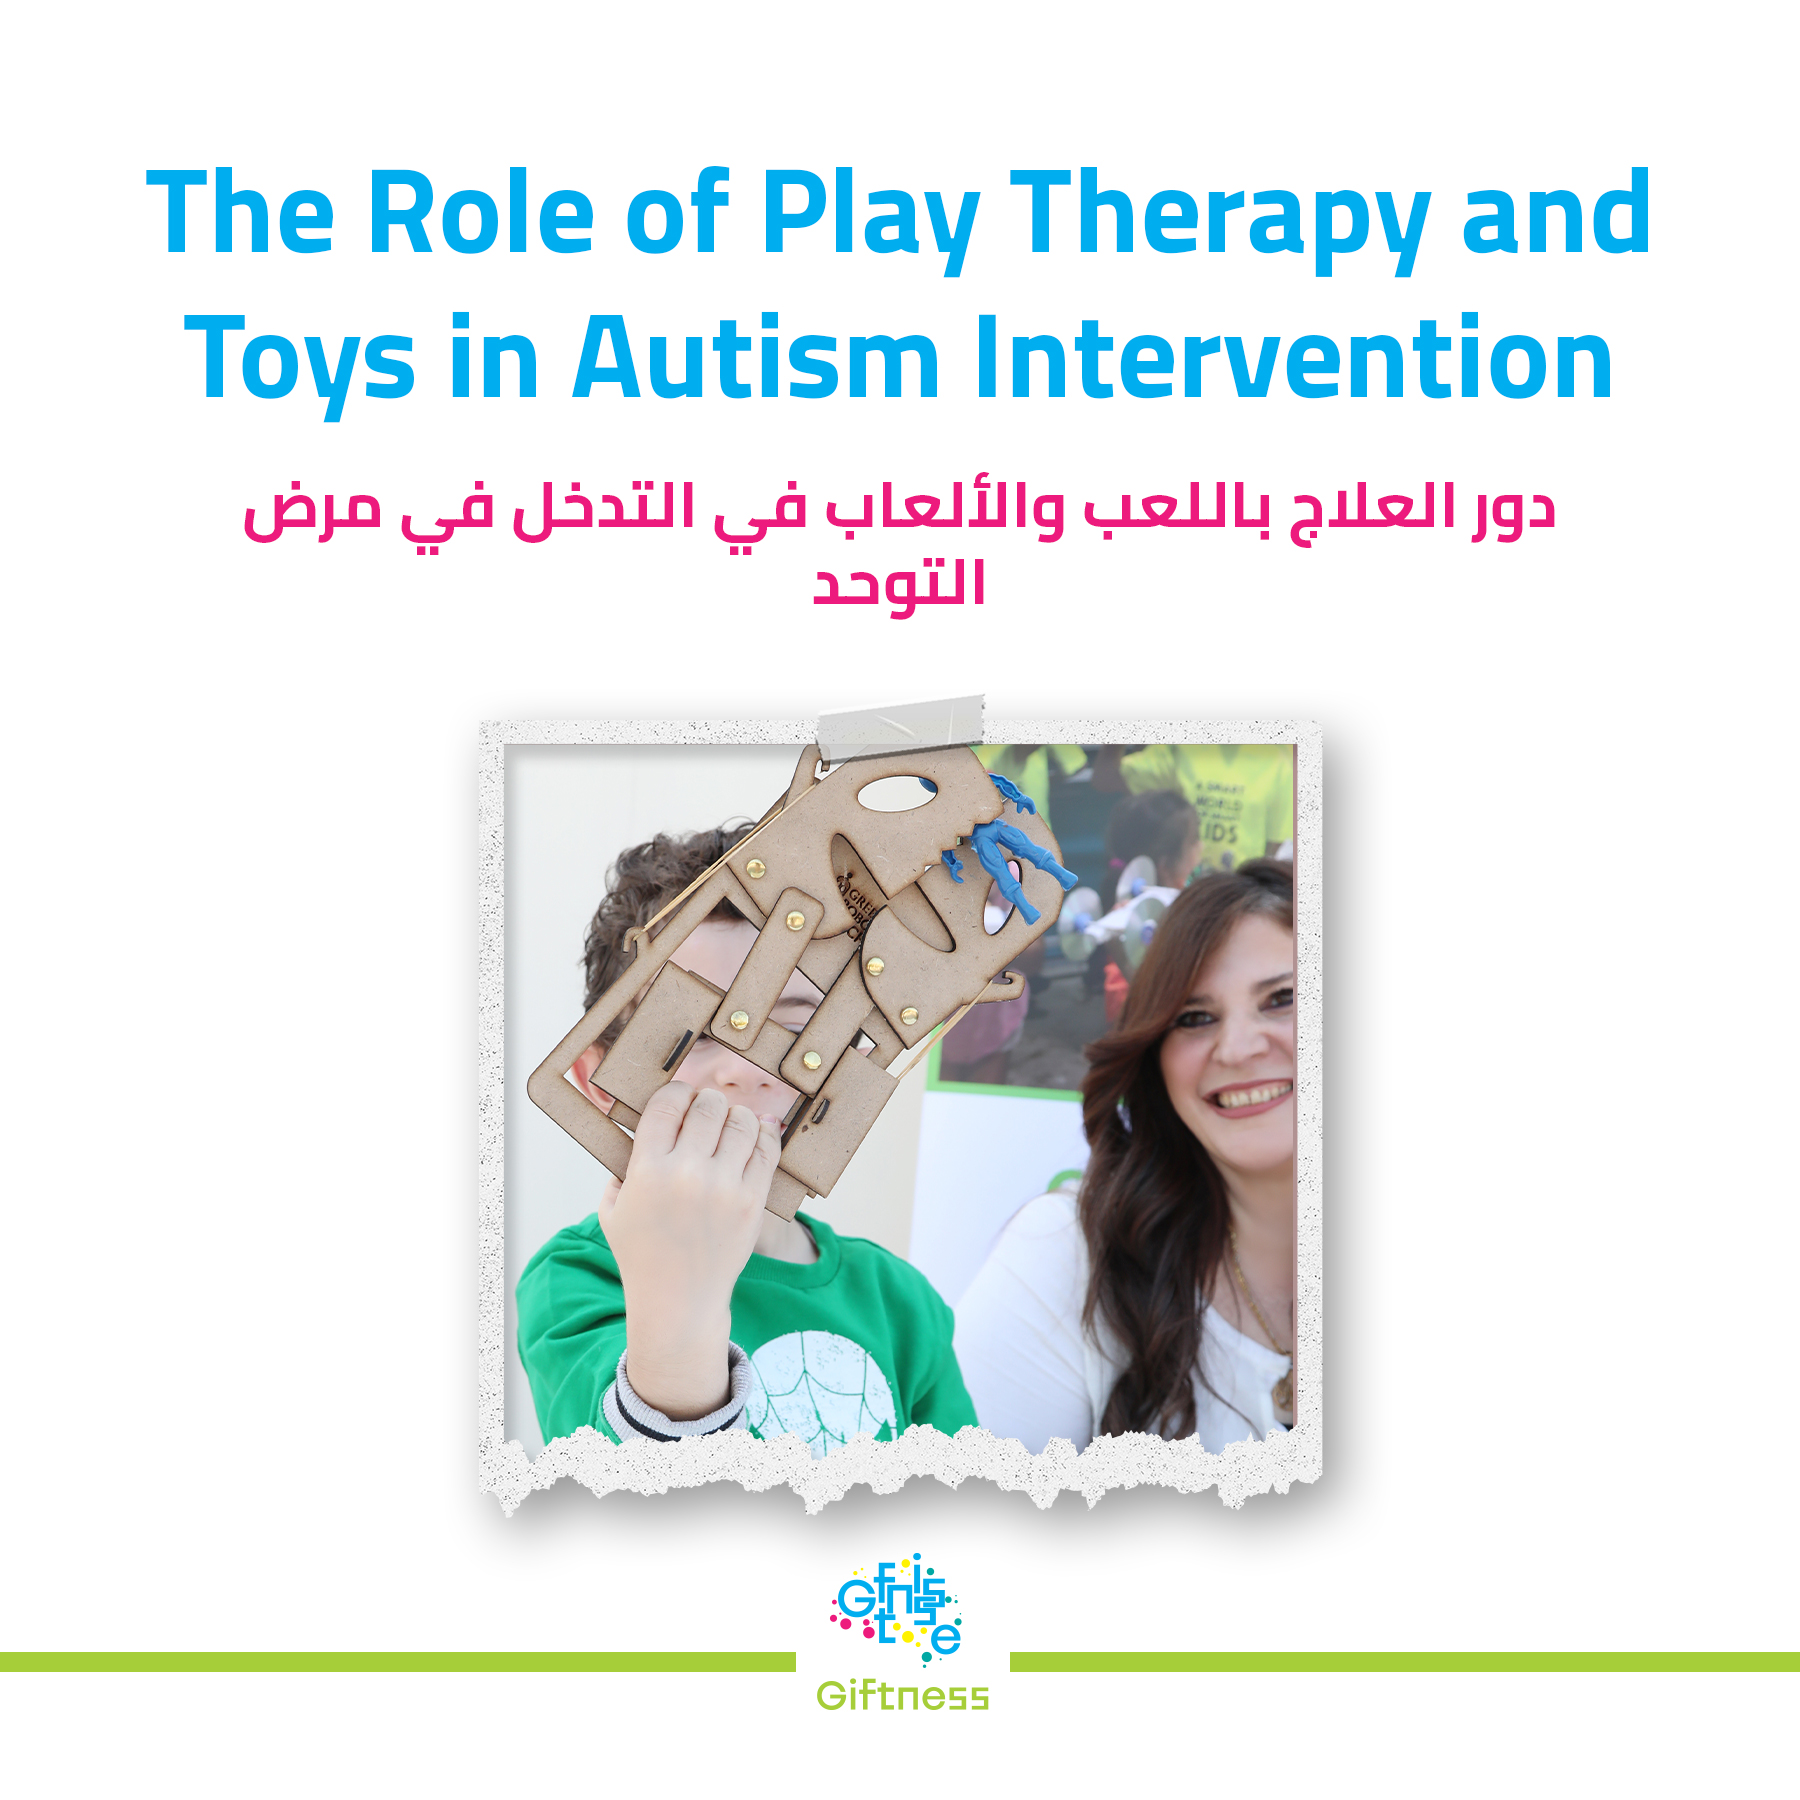 “The Role of Play Therapy and Toys in Autism Intervention”